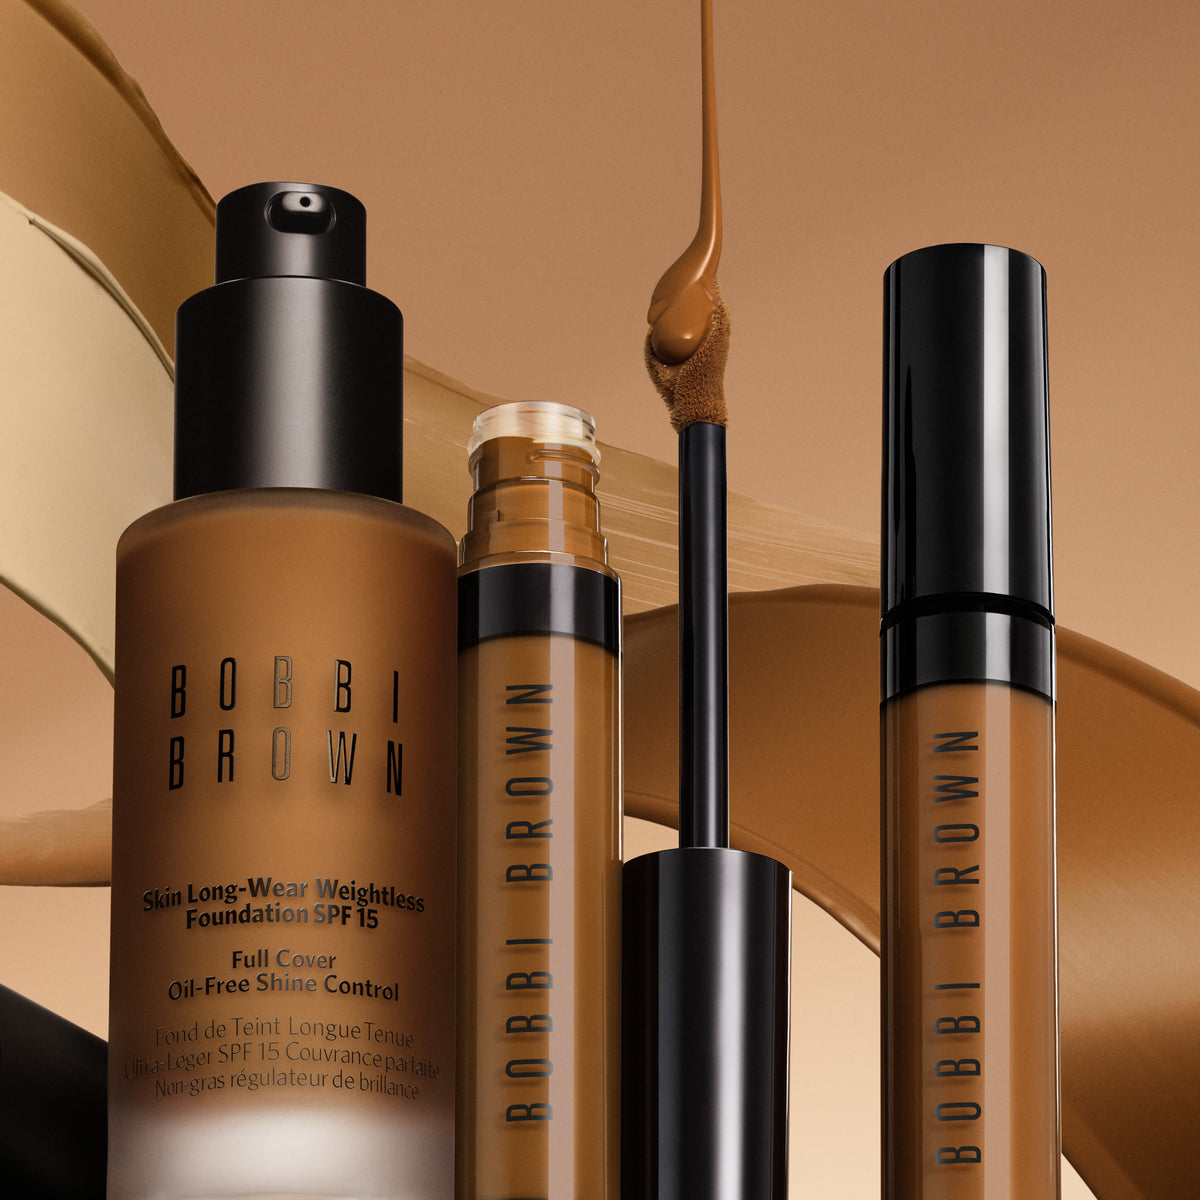 Bobbi Brown Skin Full Cover Concealer . This product is for medium complexions